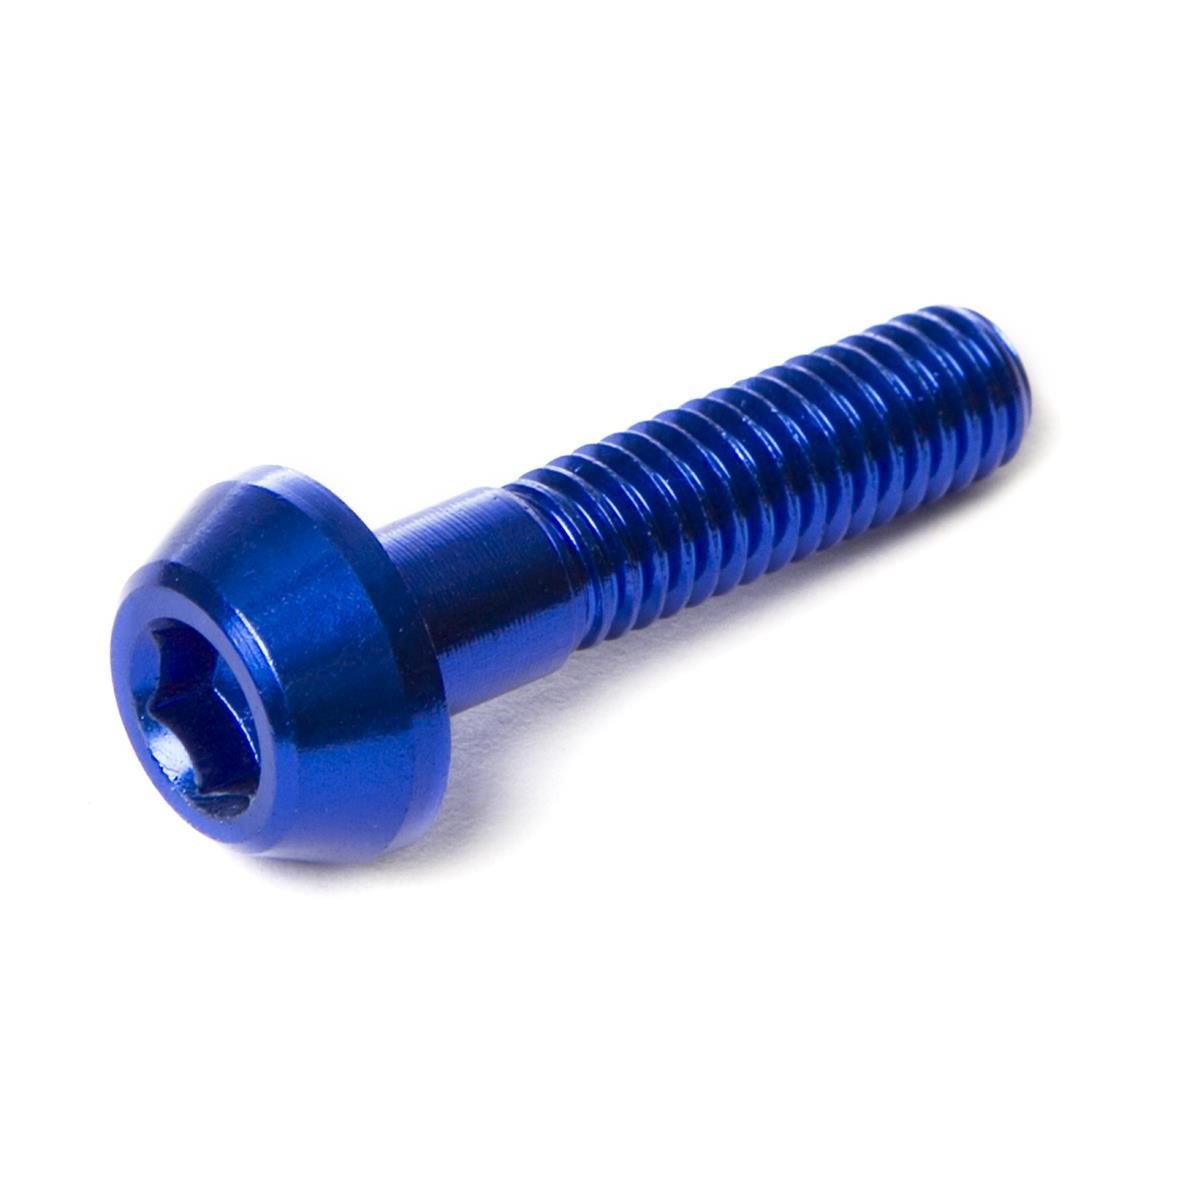 DRC Inner Hex Bolts  M6 x 12 mm, Blue, Pack of 20